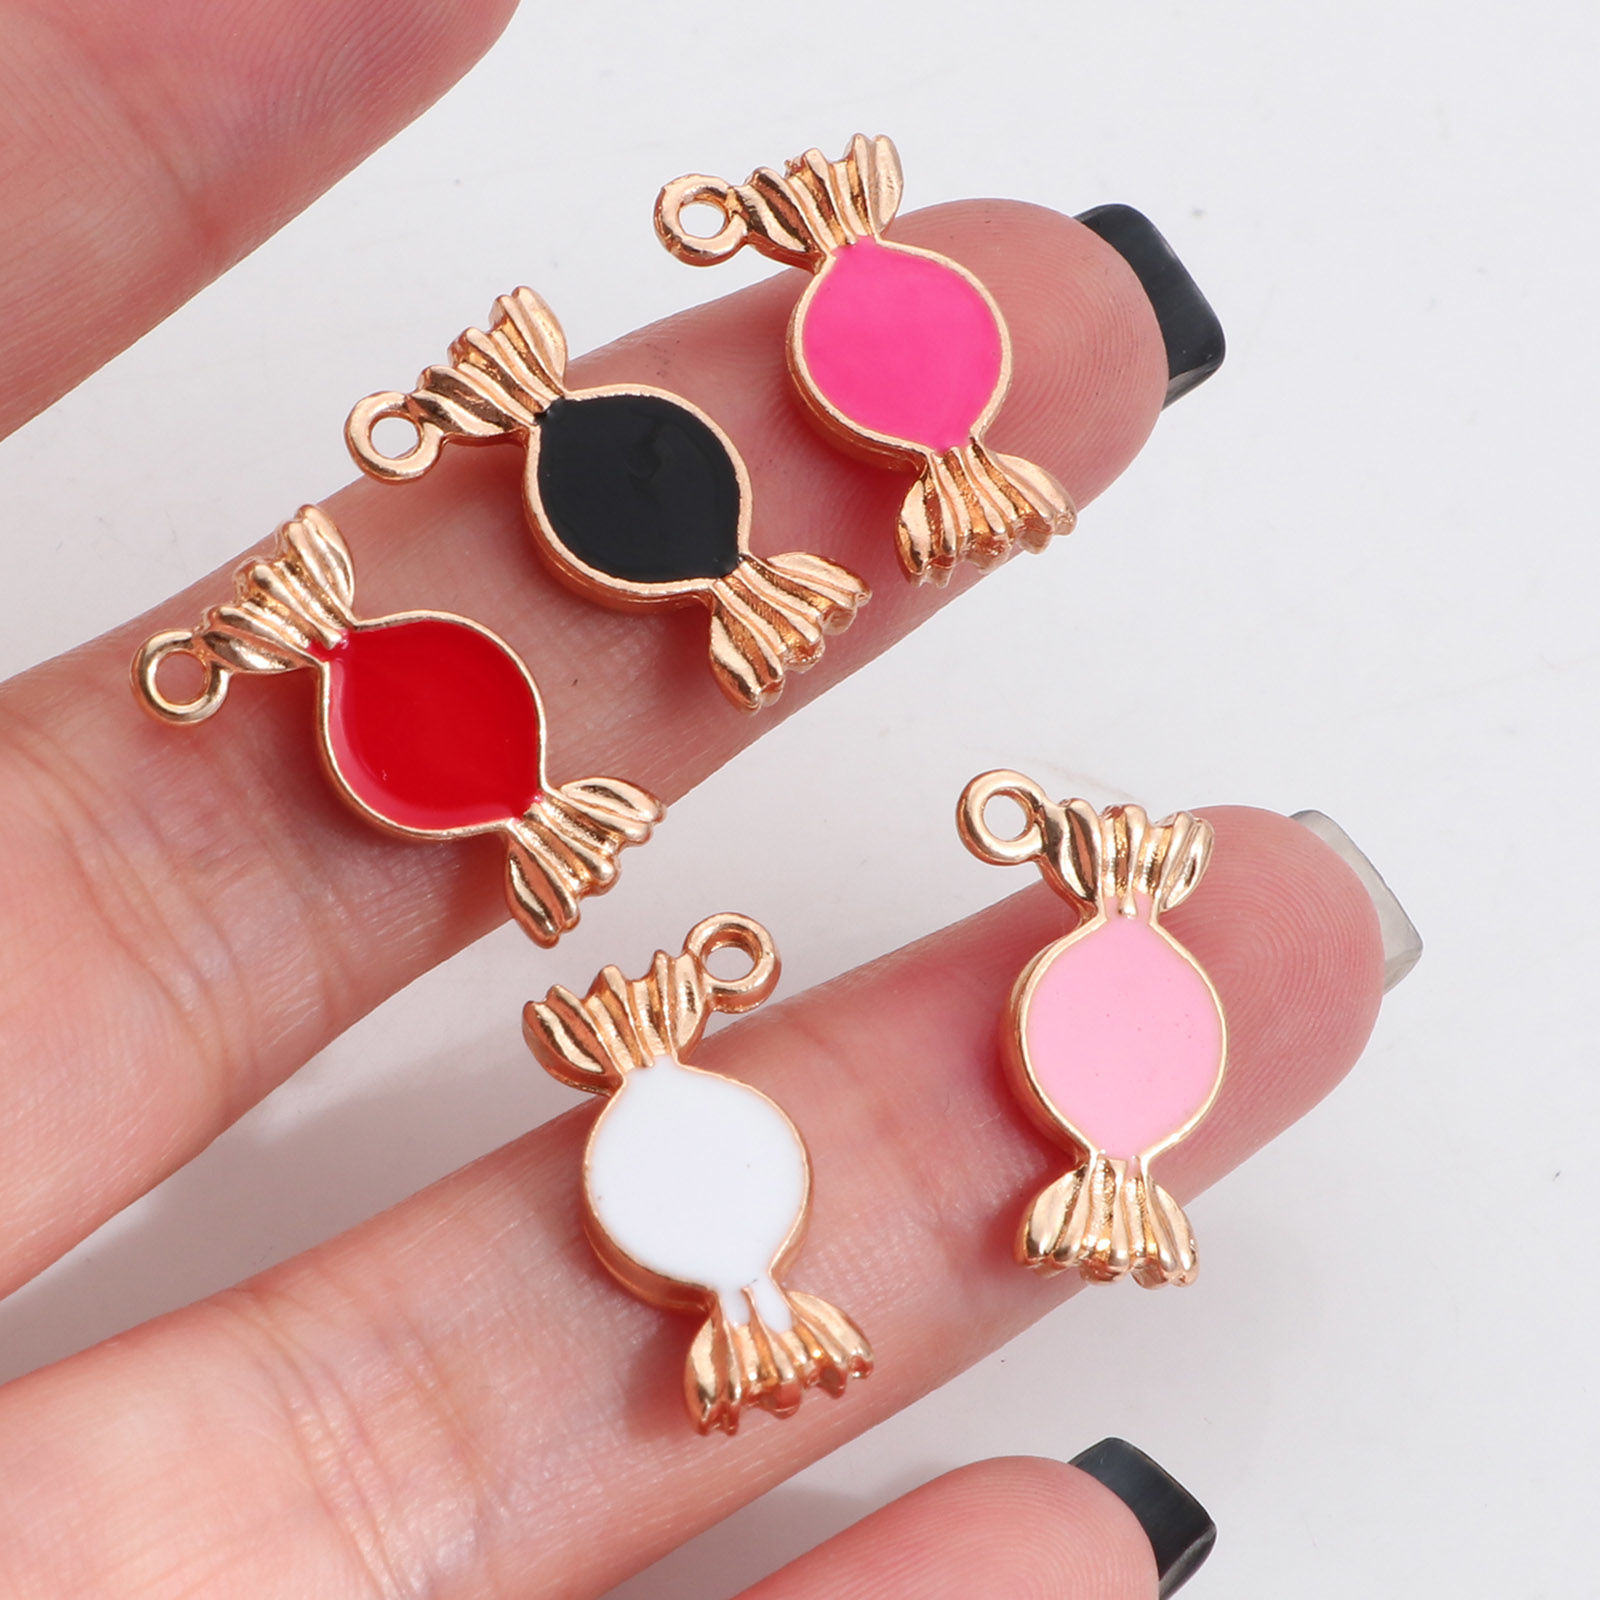 Picture of Zinc Based Alloy Charms Candy Gold Plated Multicolor Enamel 18mm x 10mm, 10 PCs